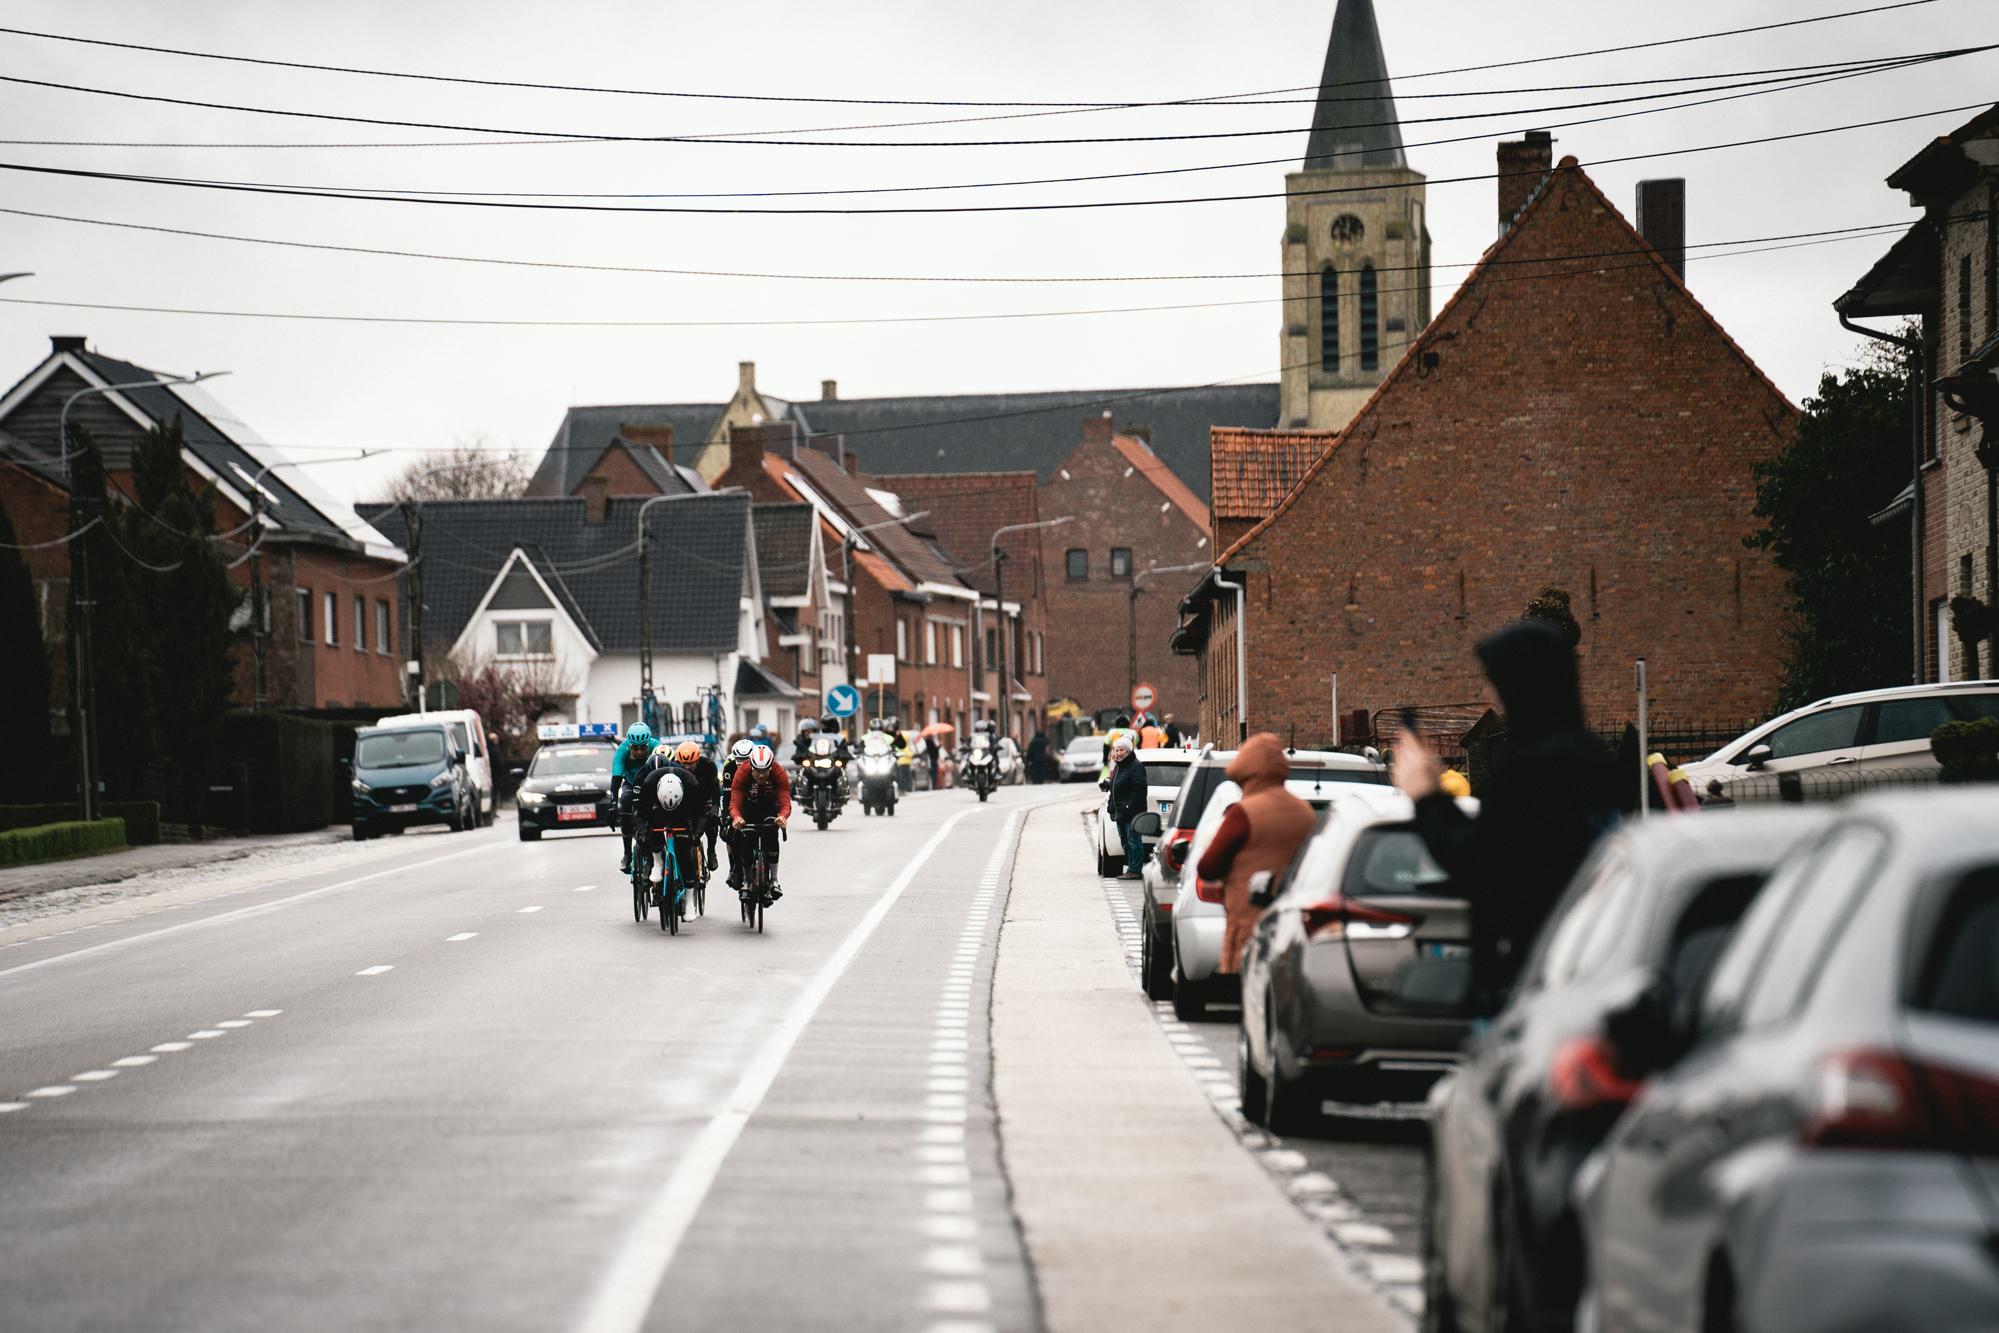 Experience Gent-Wevelgem in the fan villages of Moorsele and Gullegem